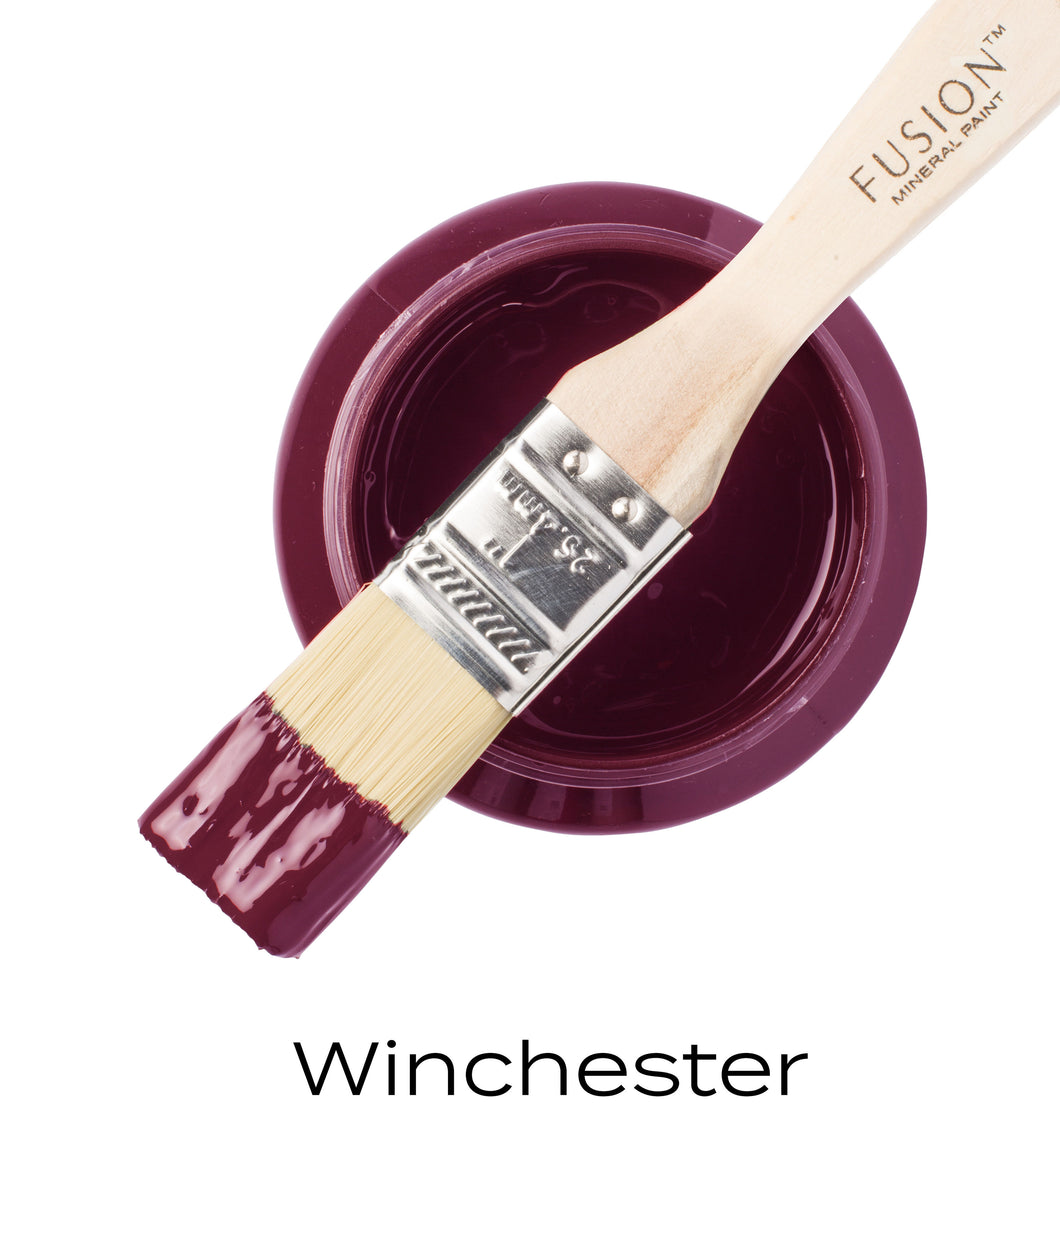 Fusion Mineral Paint Winchester 500g